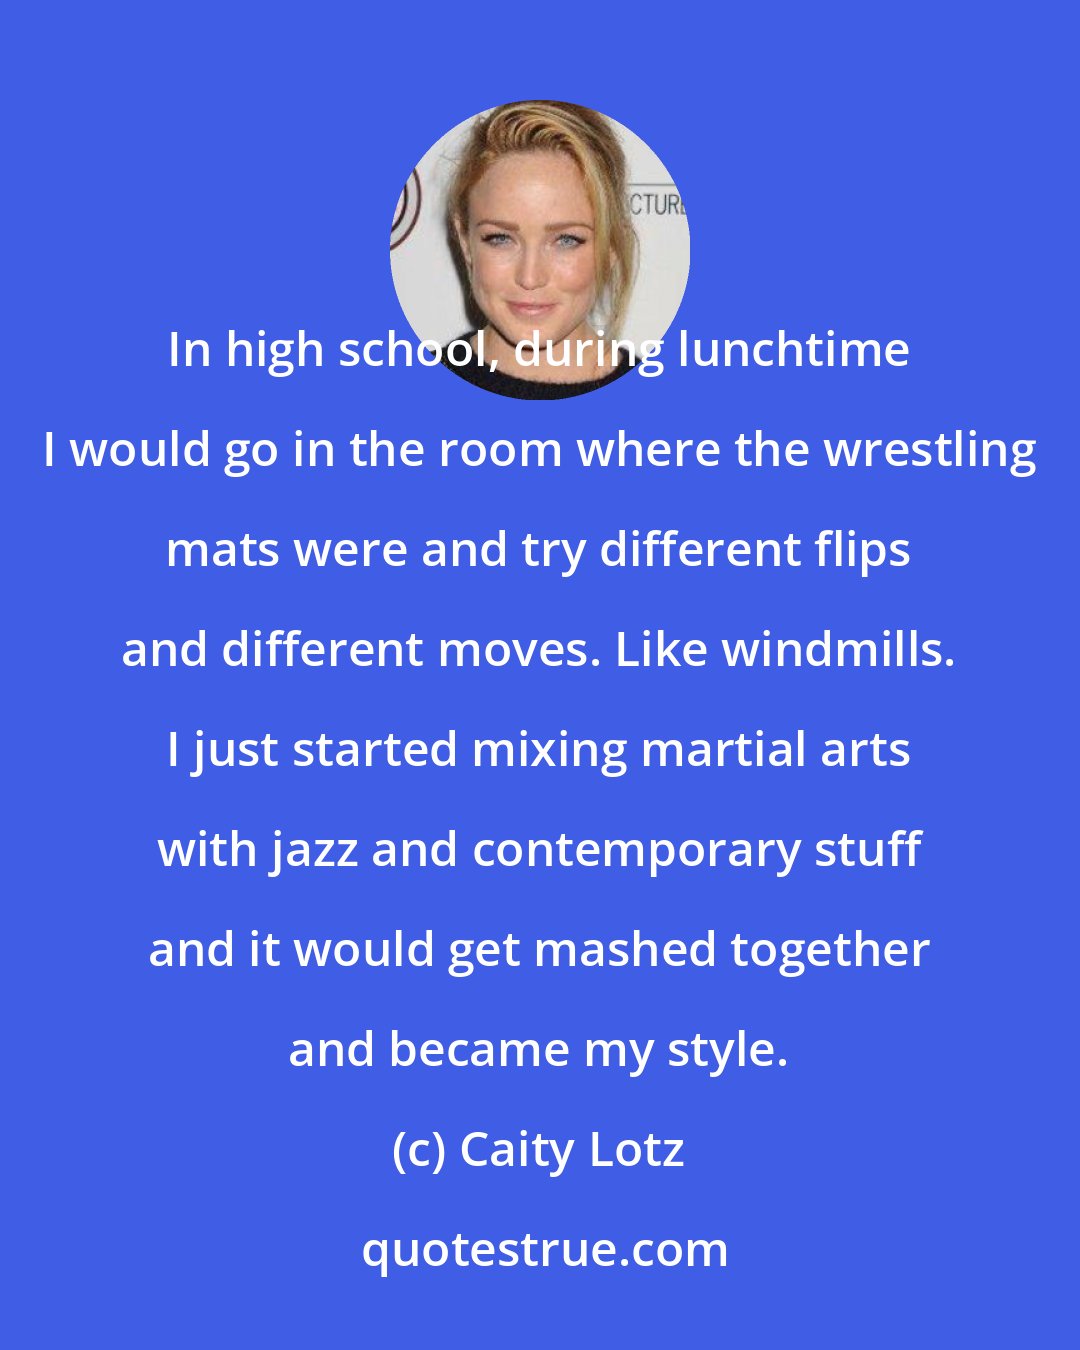 Caity Lotz: In high school, during lunchtime I would go in the room where the wrestling mats were and try different flips and different moves. Like windmills. I just started mixing martial arts with jazz and contemporary stuff and it would get mashed together and became my style.